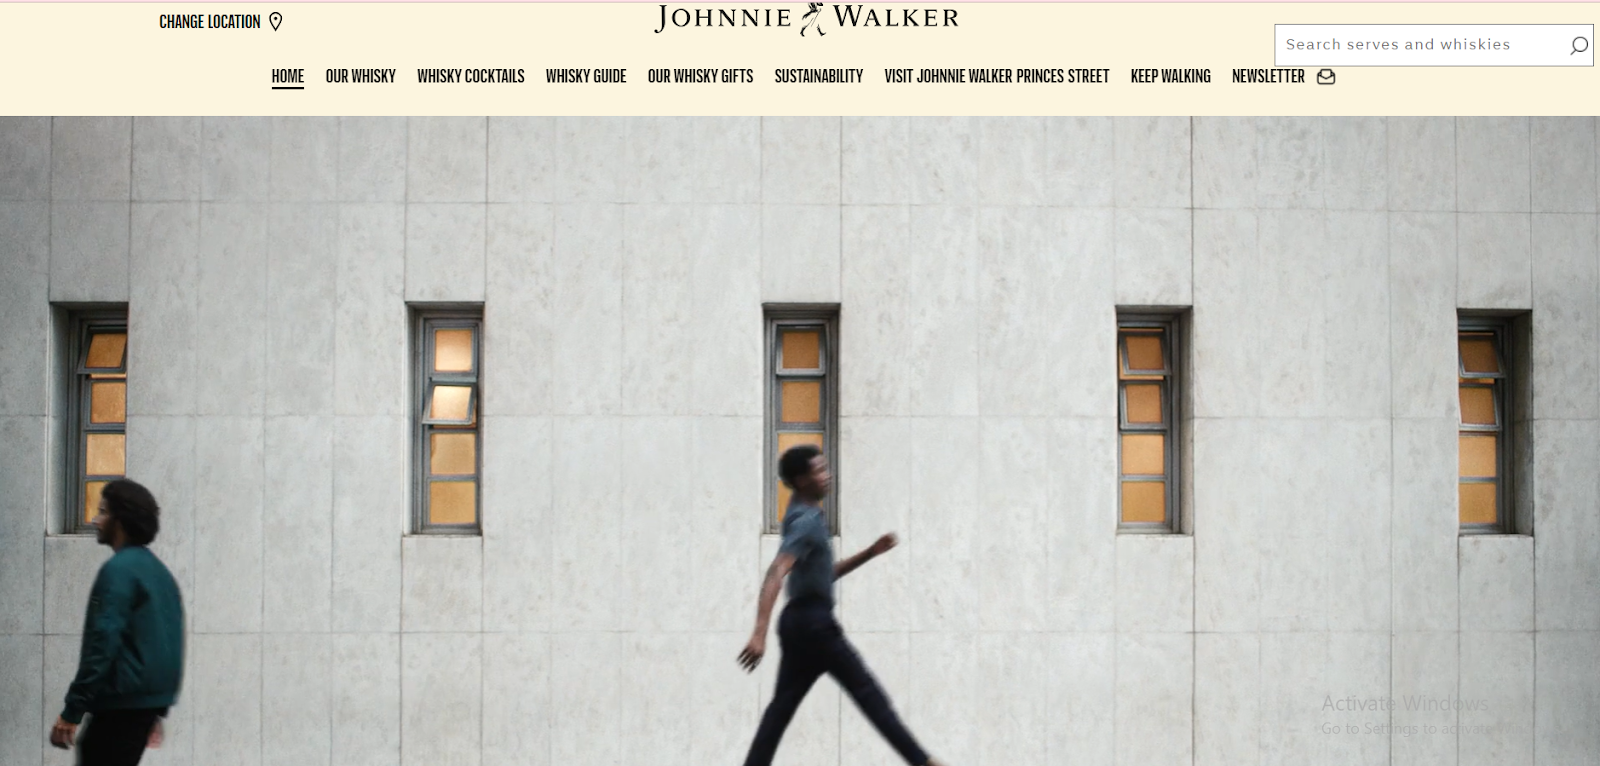 video as background image css example from johnnie walker